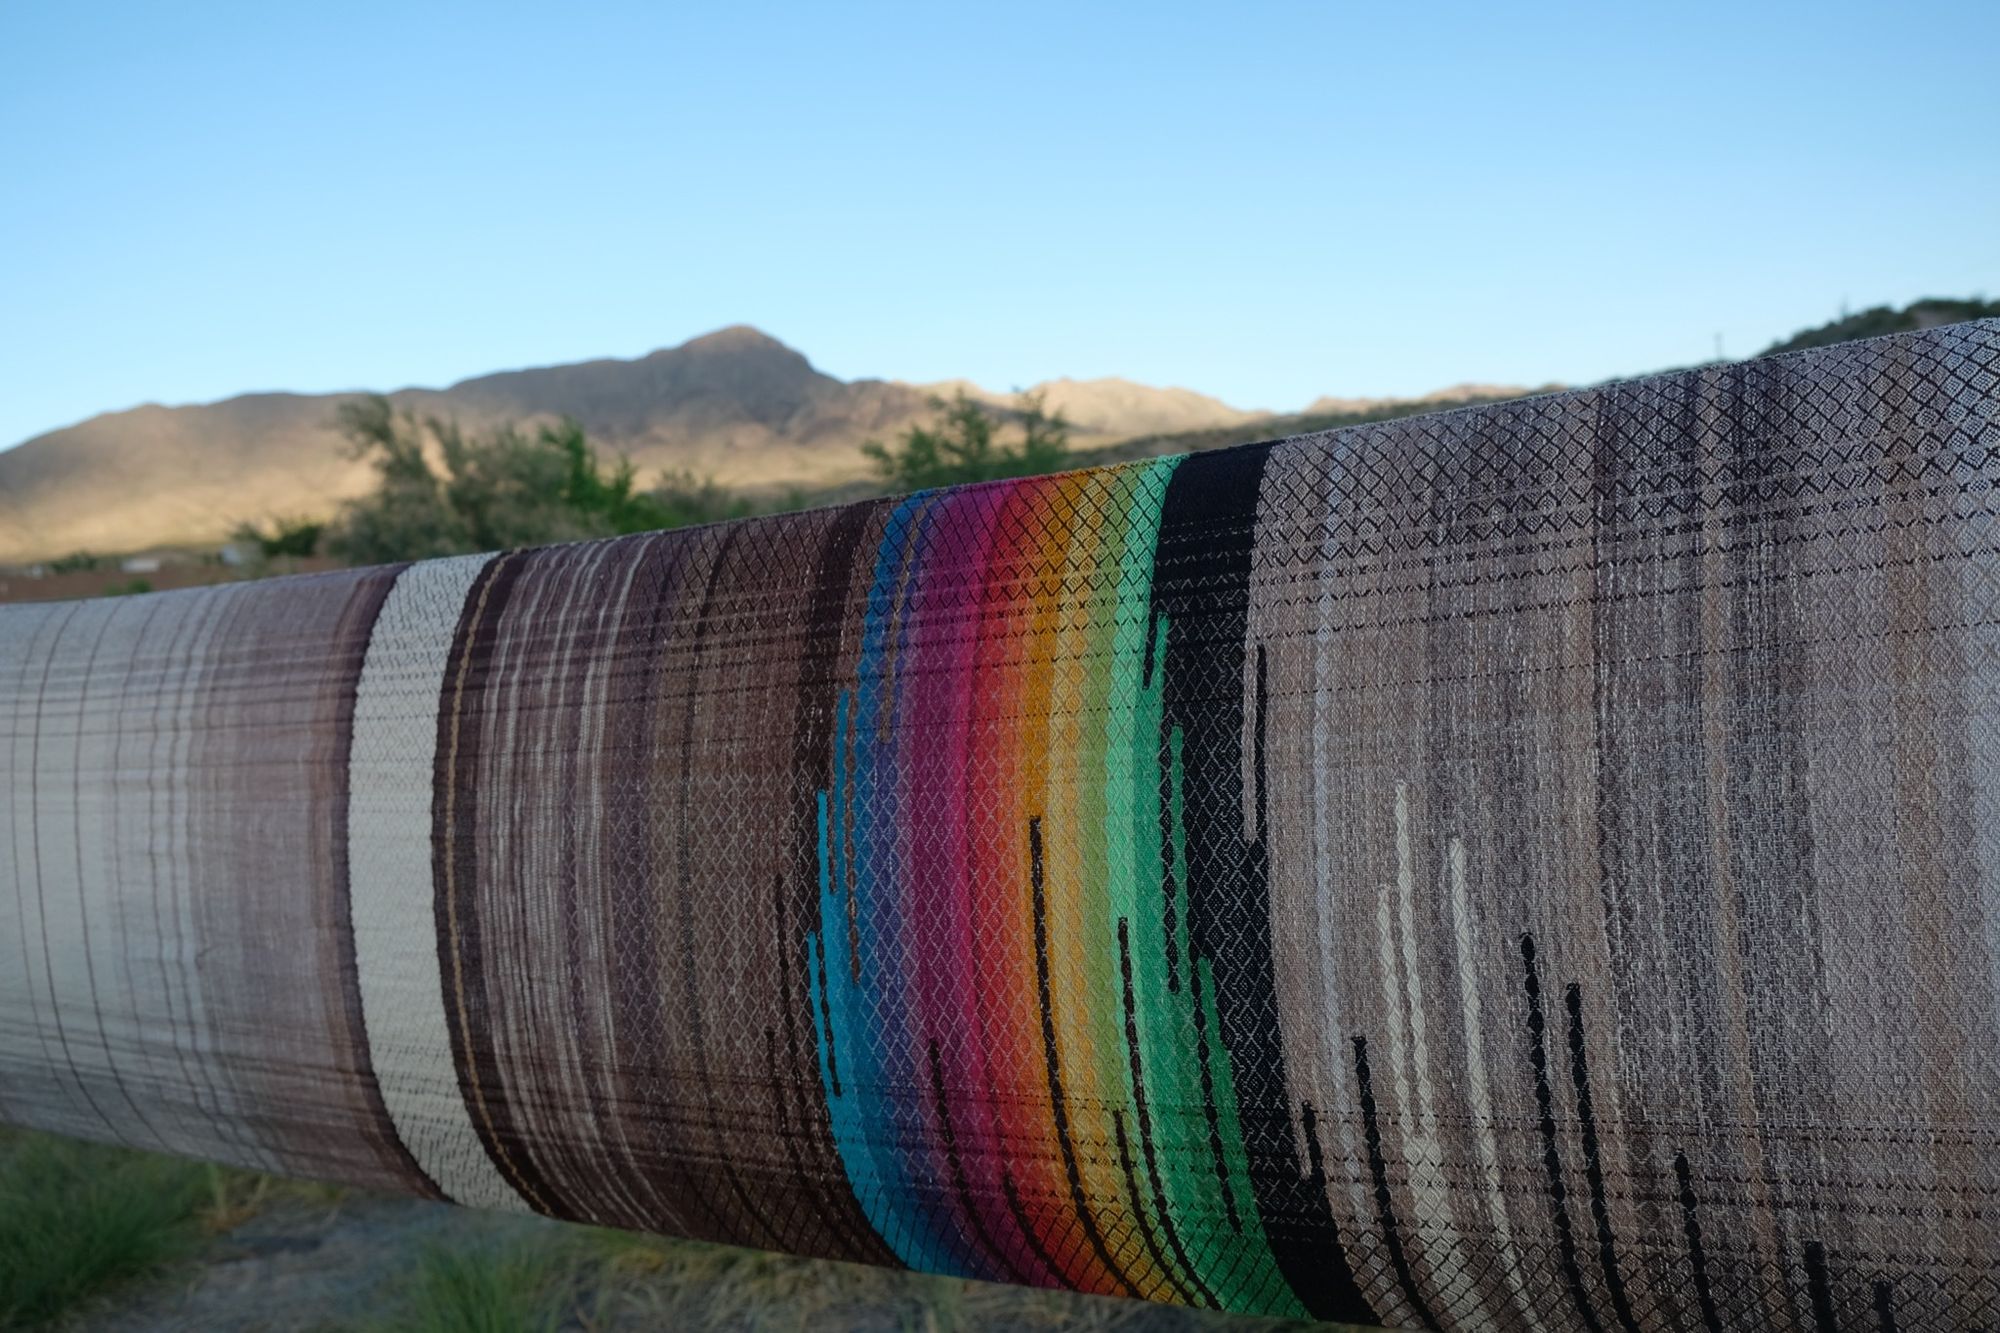 detail of Multi colored handwoven raw silk fabric being held up by two people in the desert